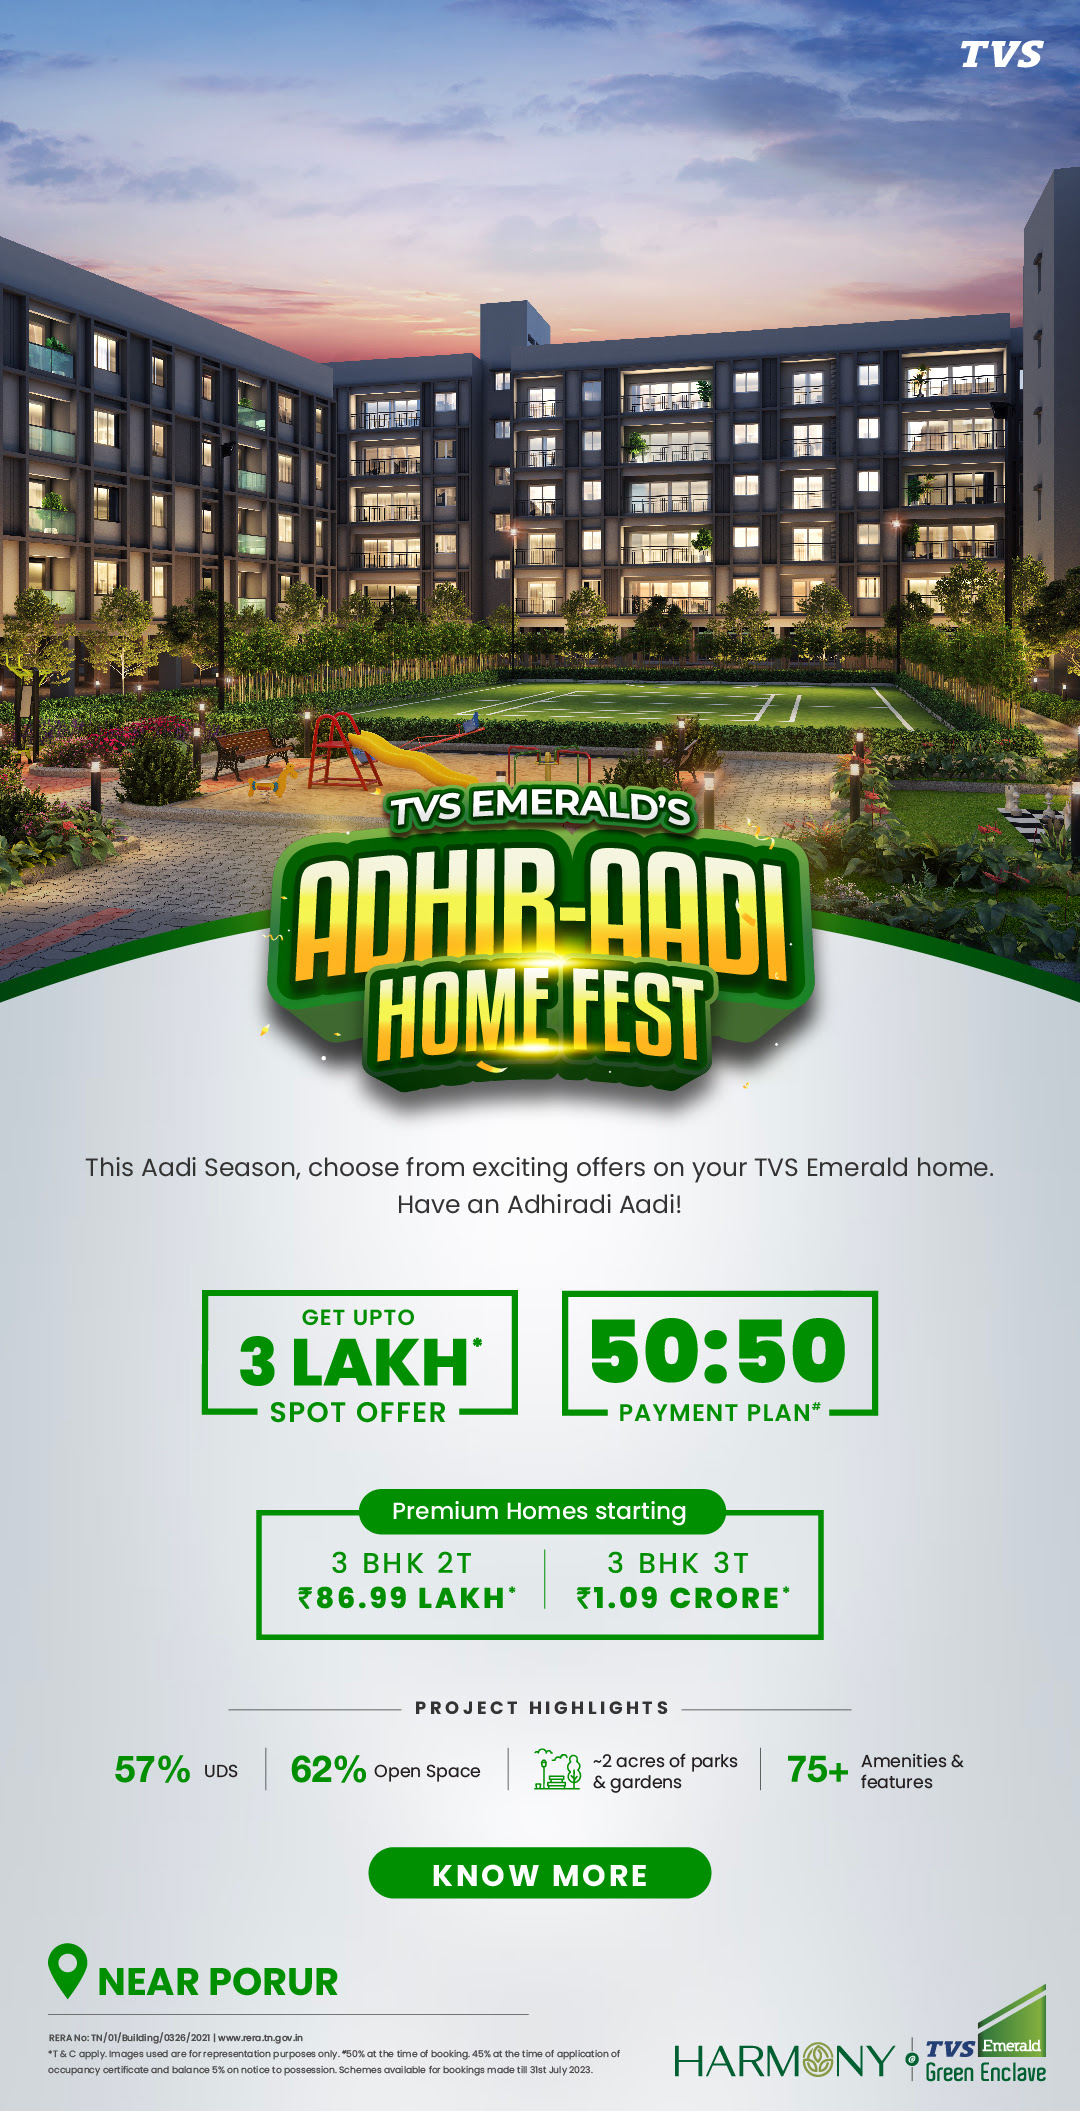 Get upto Rs 3 Lac spot offer at TVS Emerald Green Enclave, Chennai Update